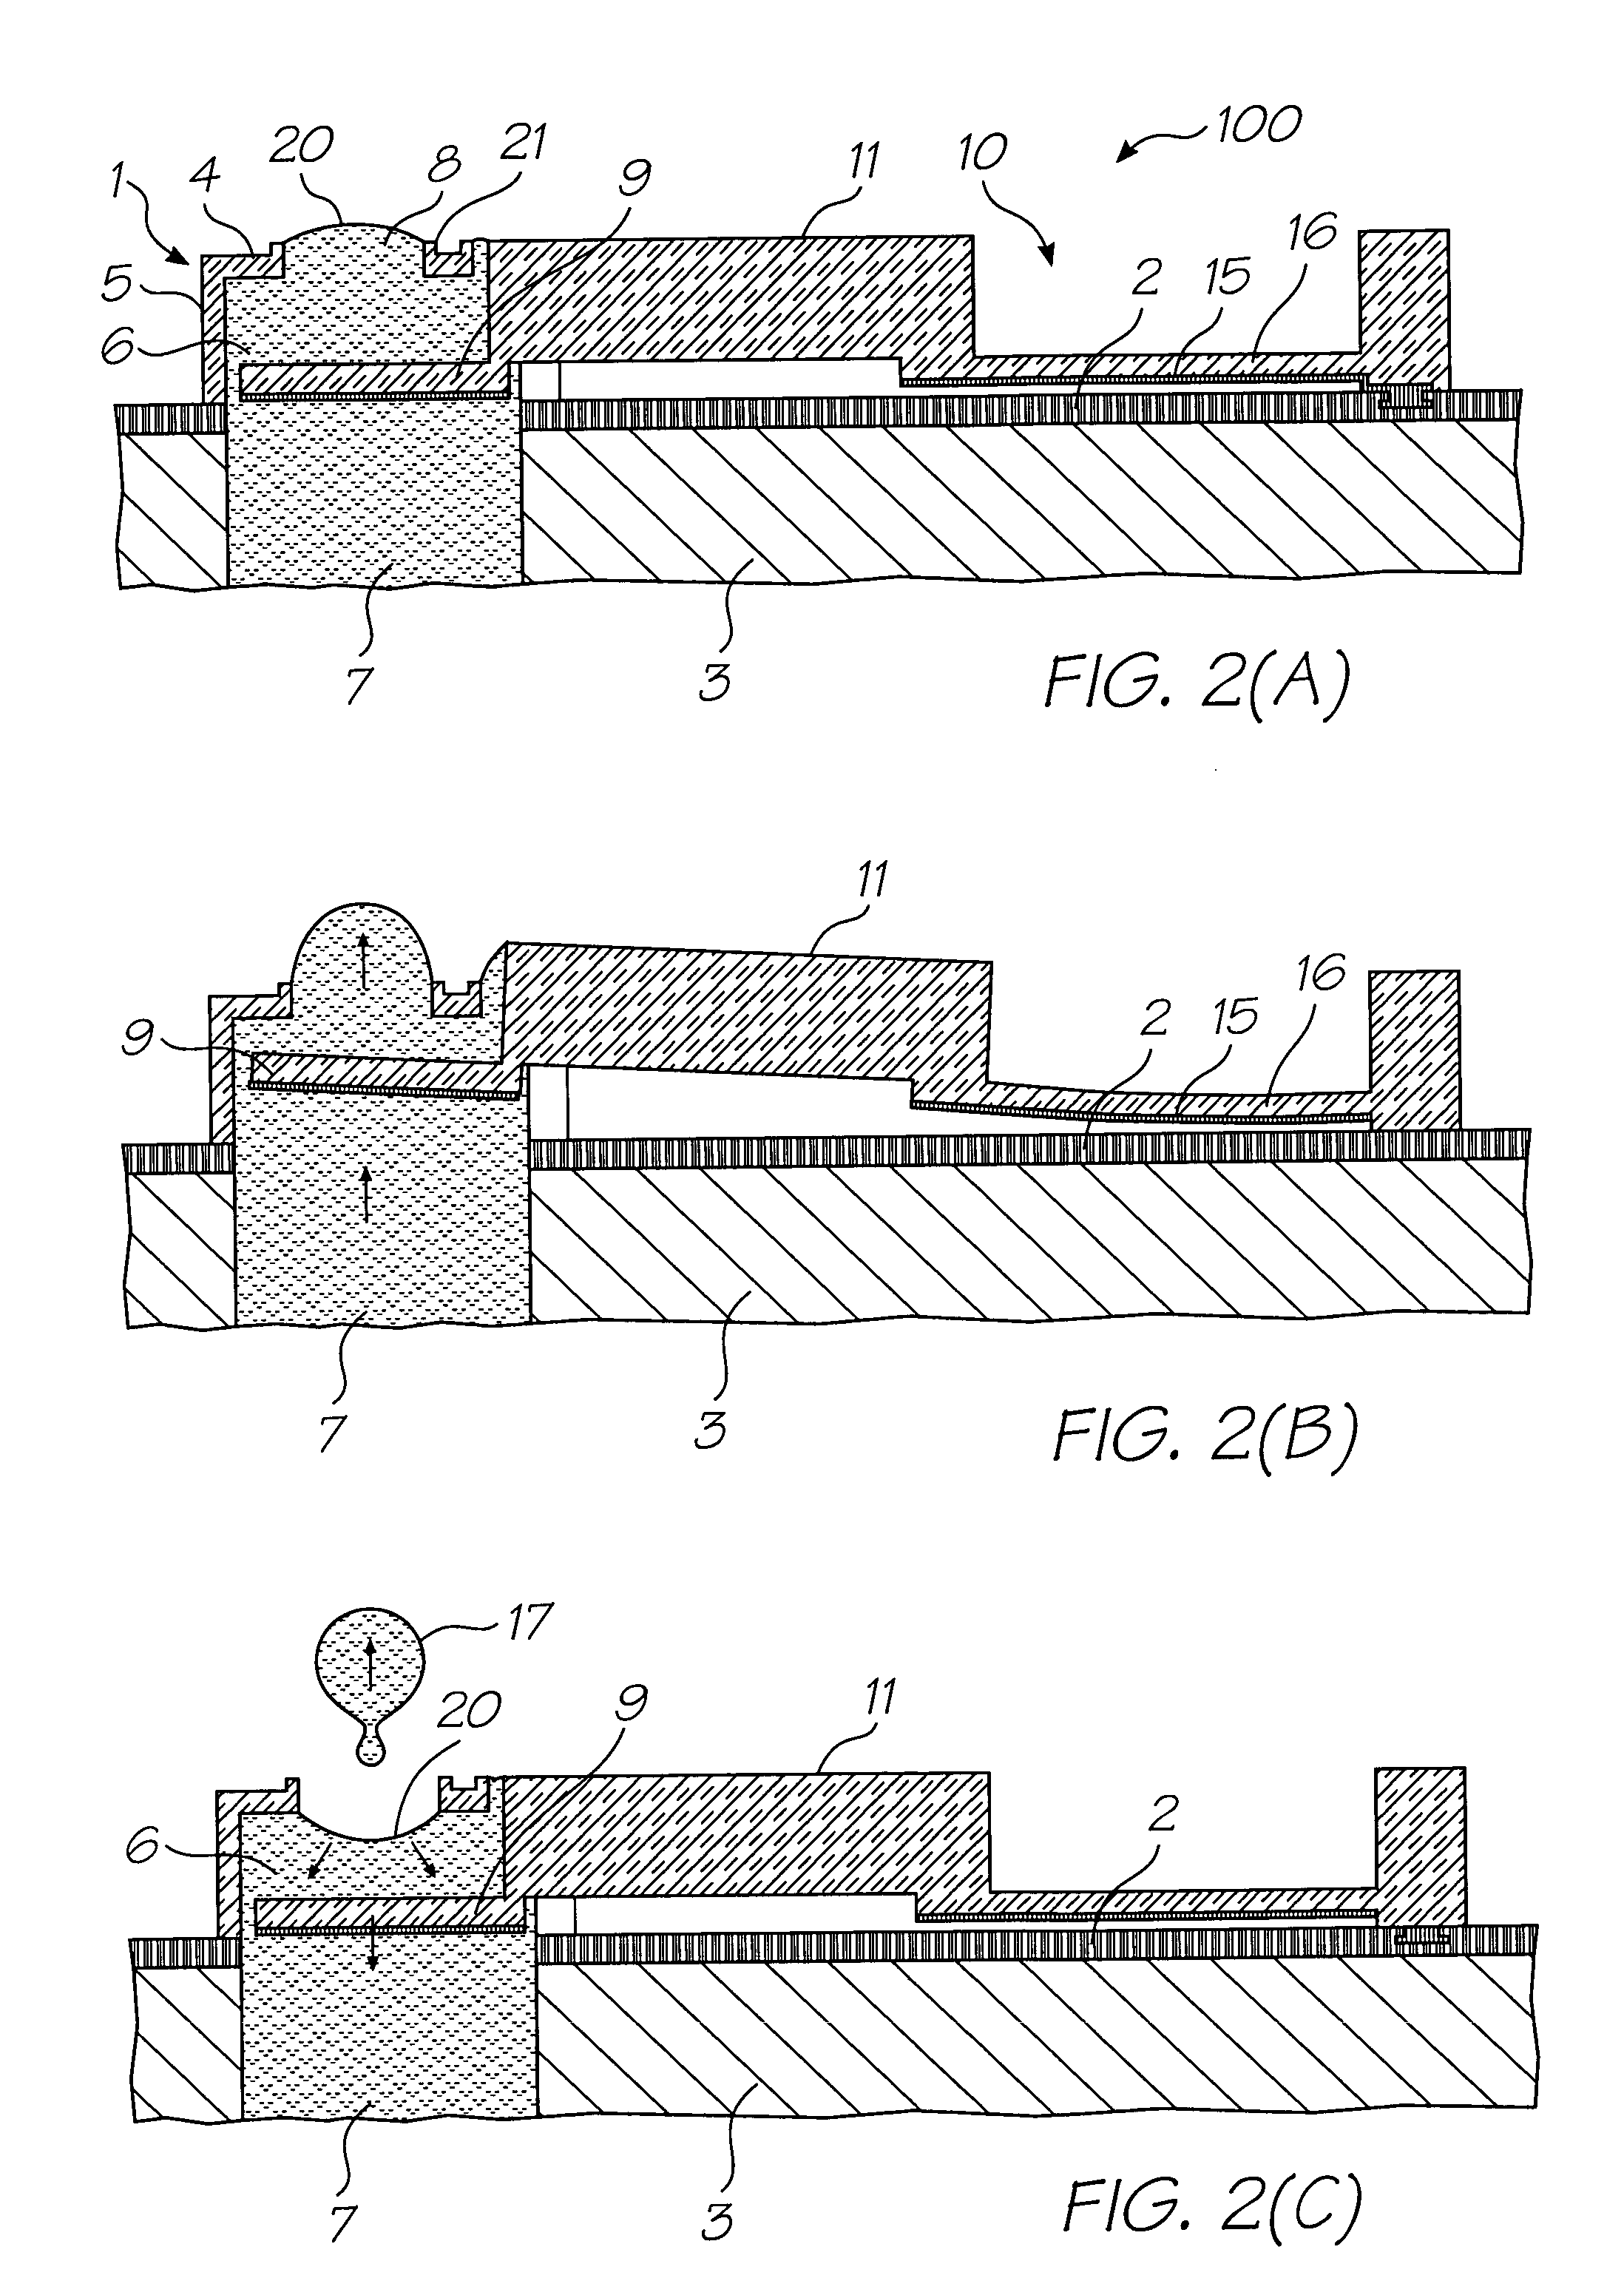 Inkjet nozzle assembly having moving roof portion defined by a thermal bend actuator having a plurality of cantilever beams